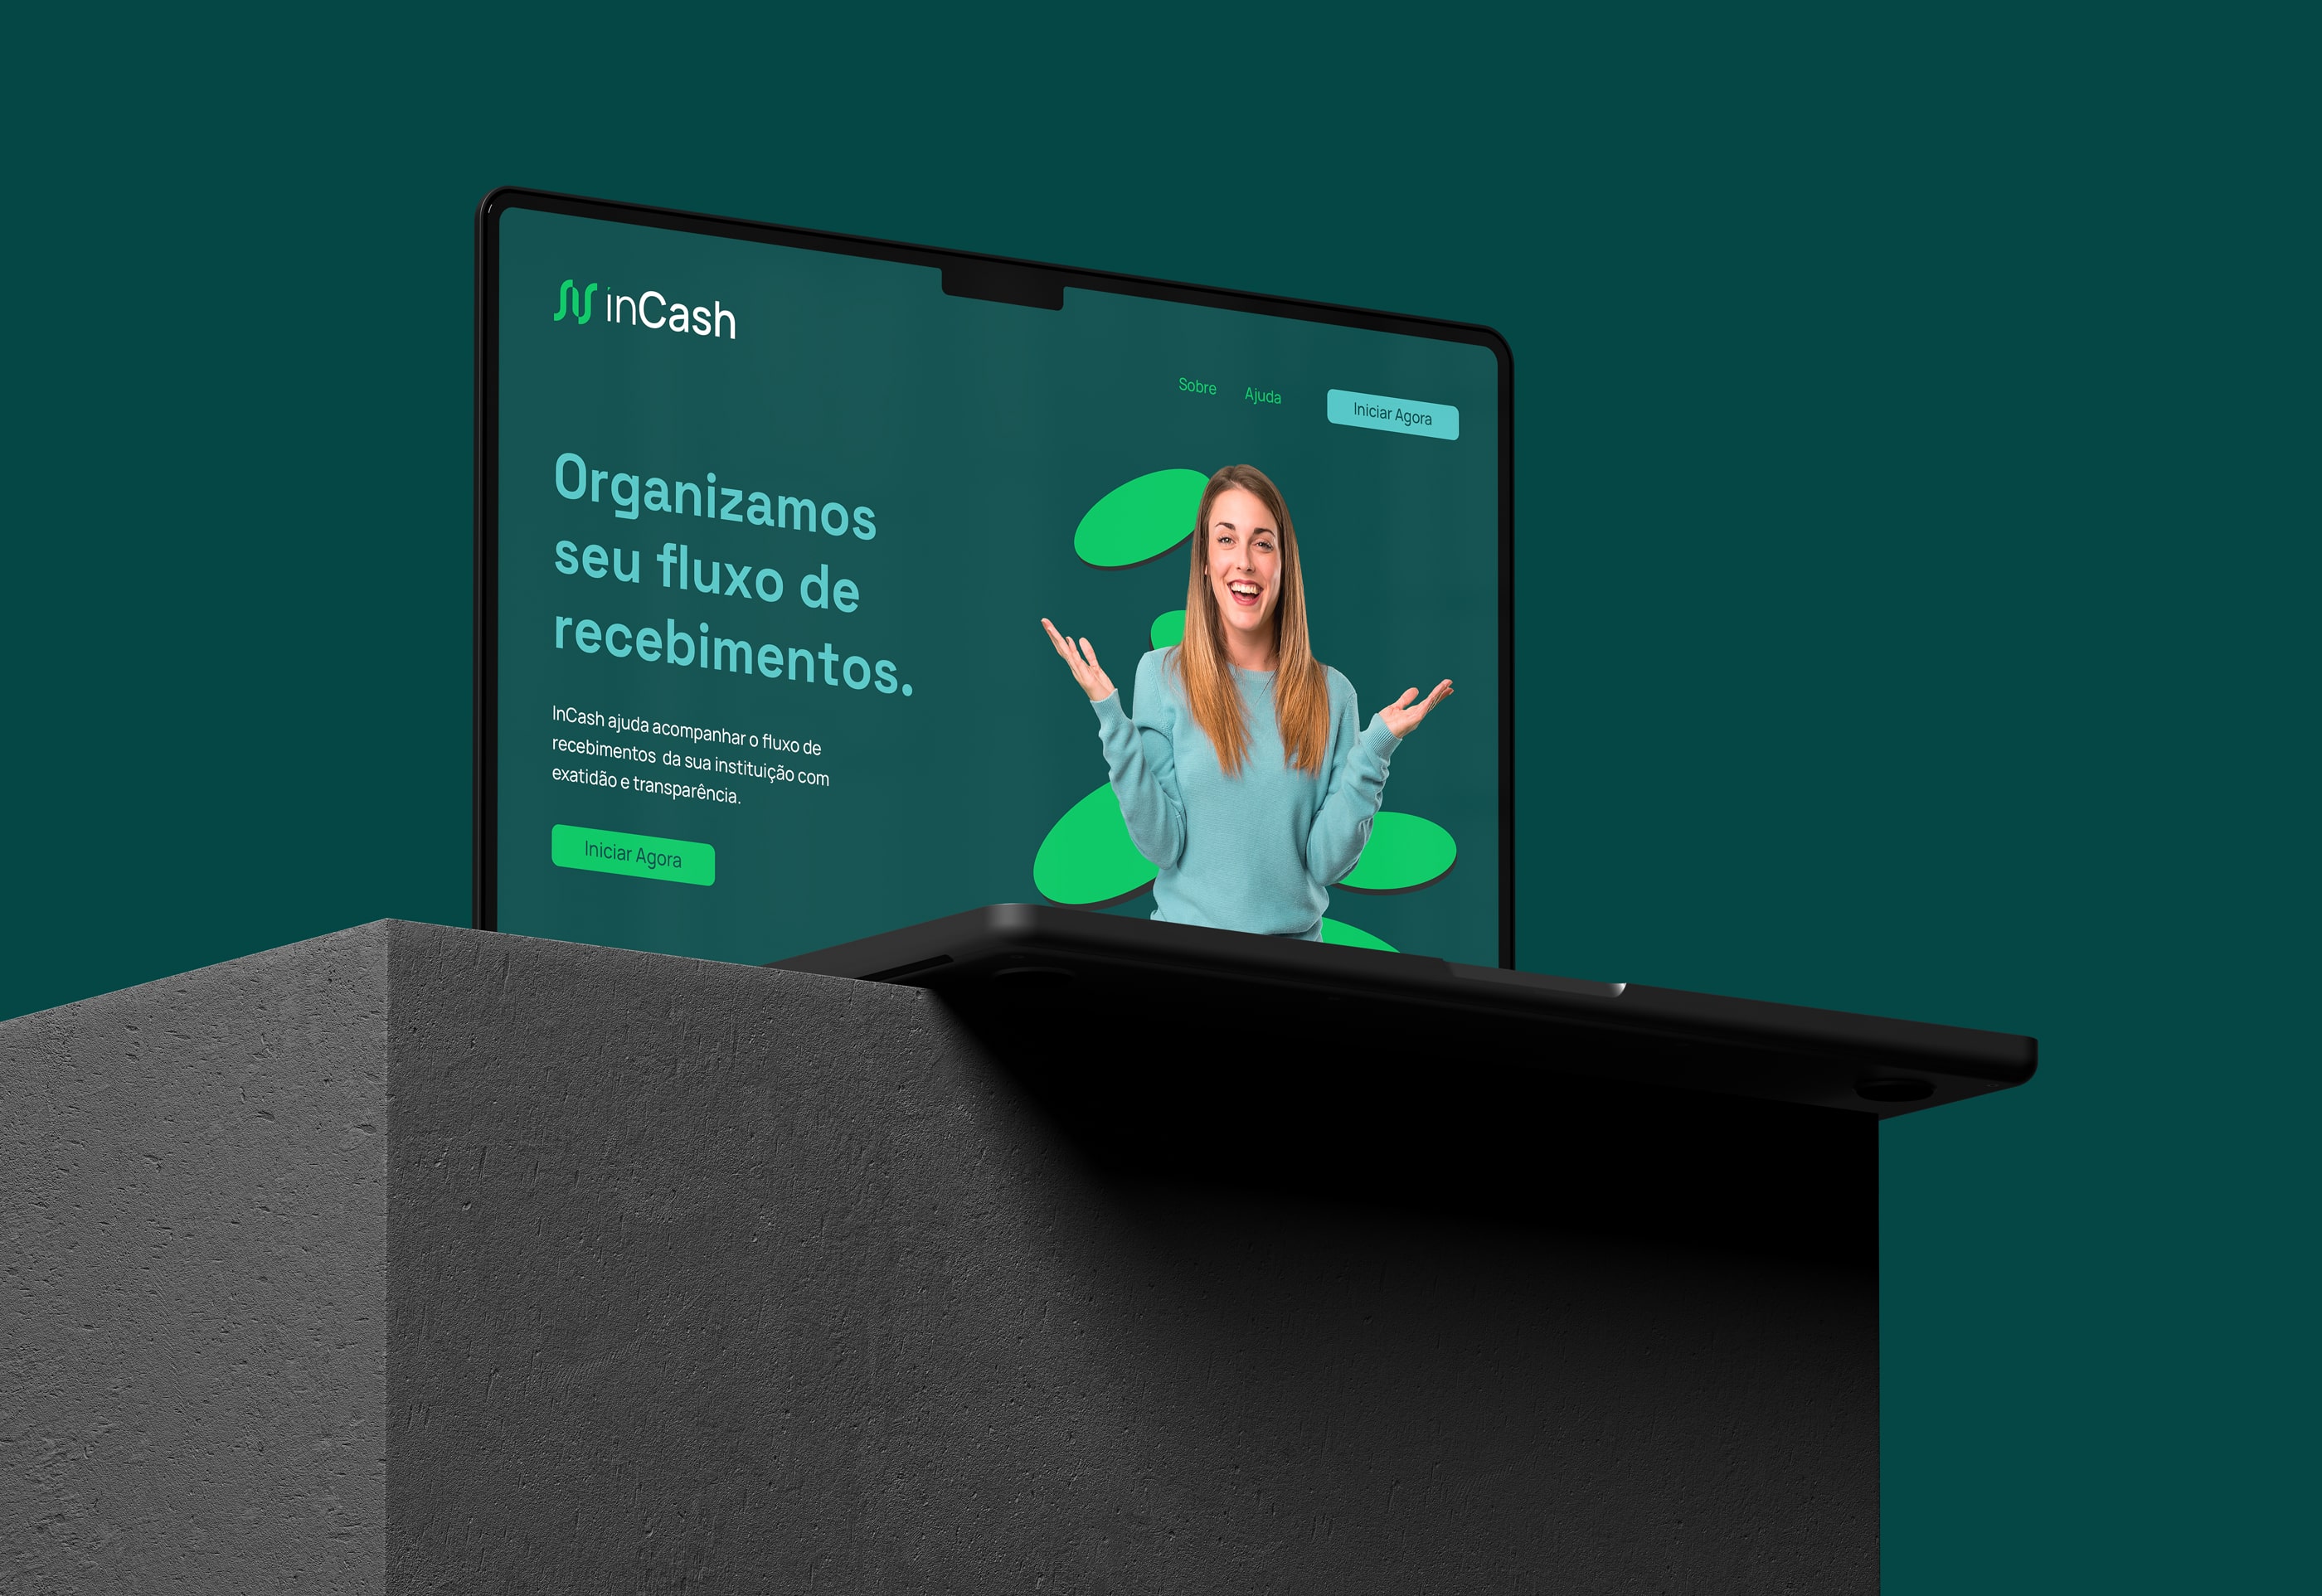 Visual Identity Concept for inCash by Samuel Brands